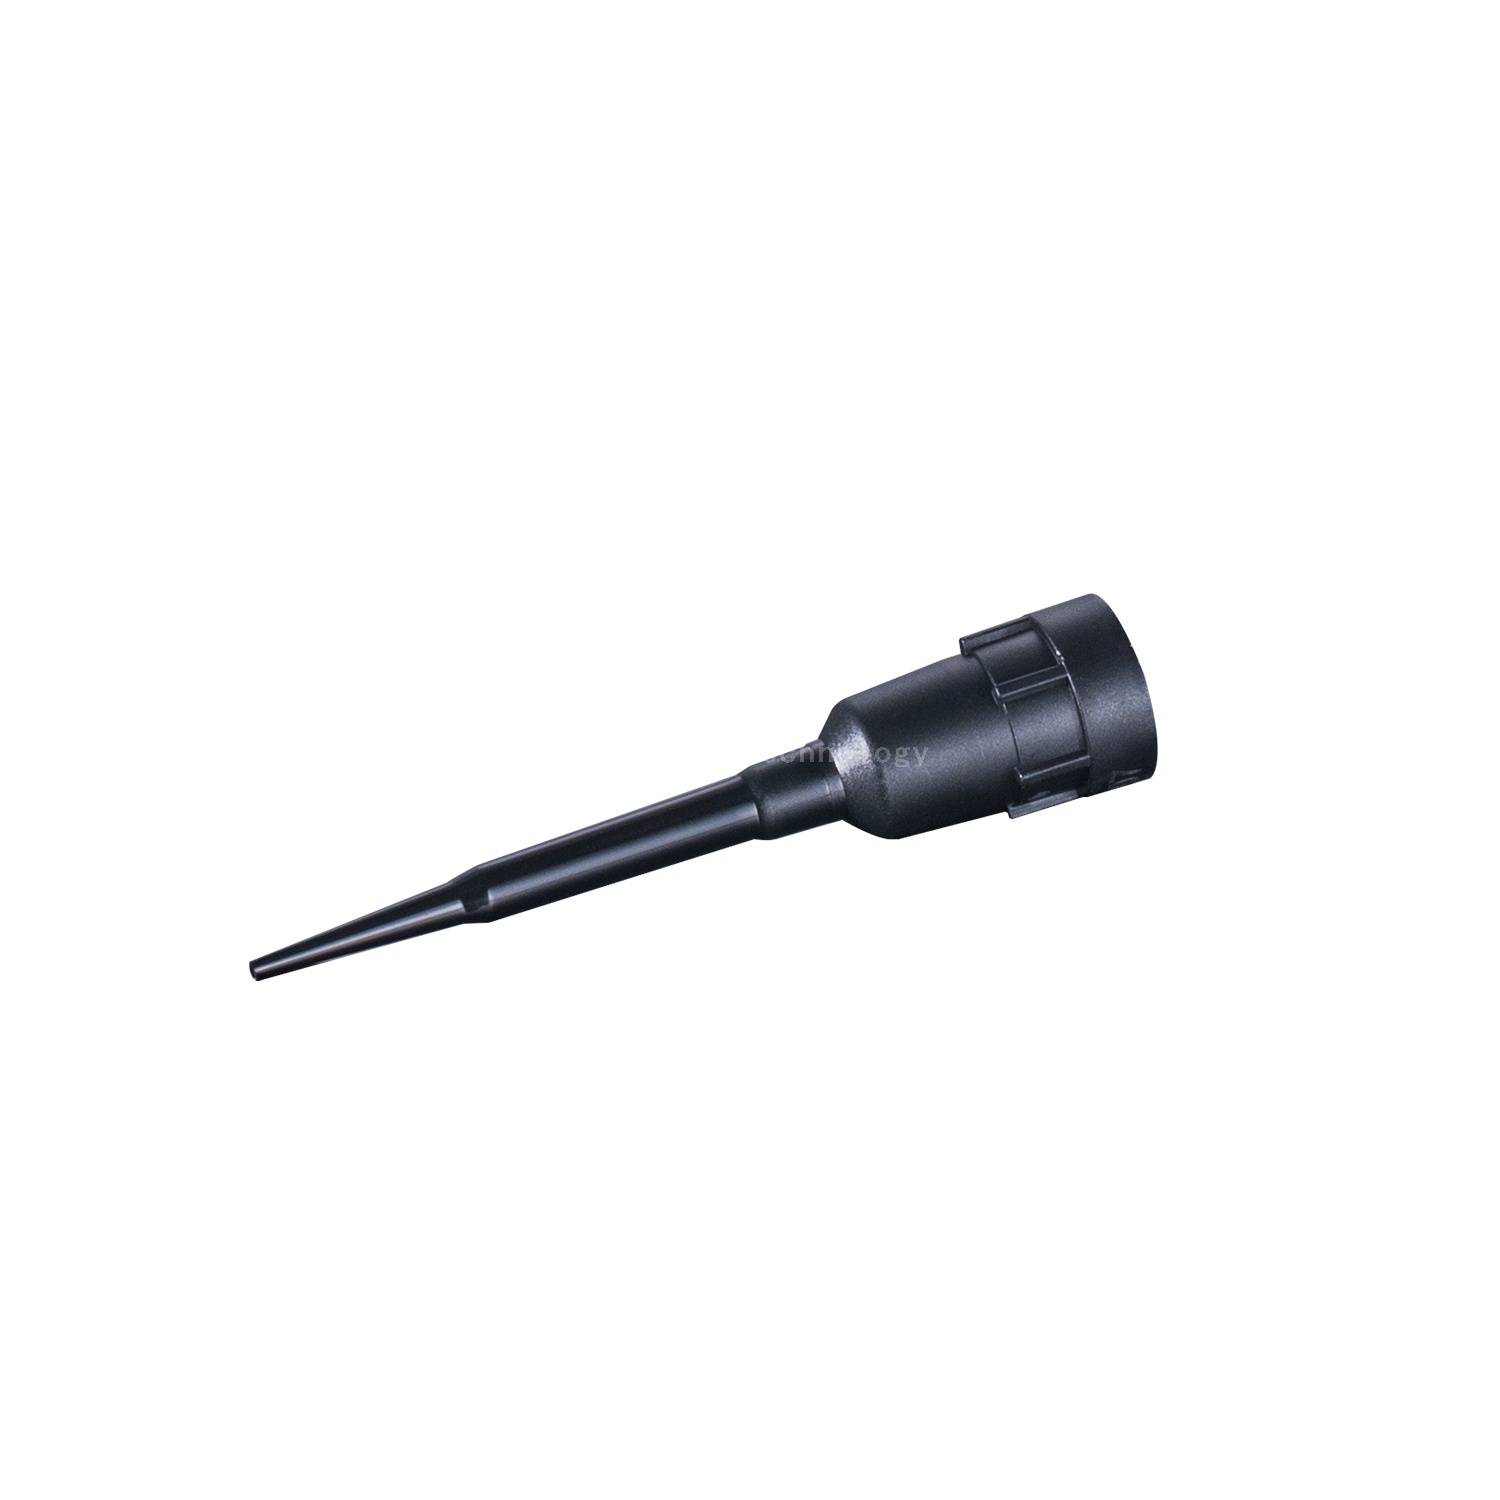 Tecan LiHa 20μL Conductive PP Pipette Tip (Racked,sterilized) for Liquid Transfer No Filter TT-20-RSL Low Residual